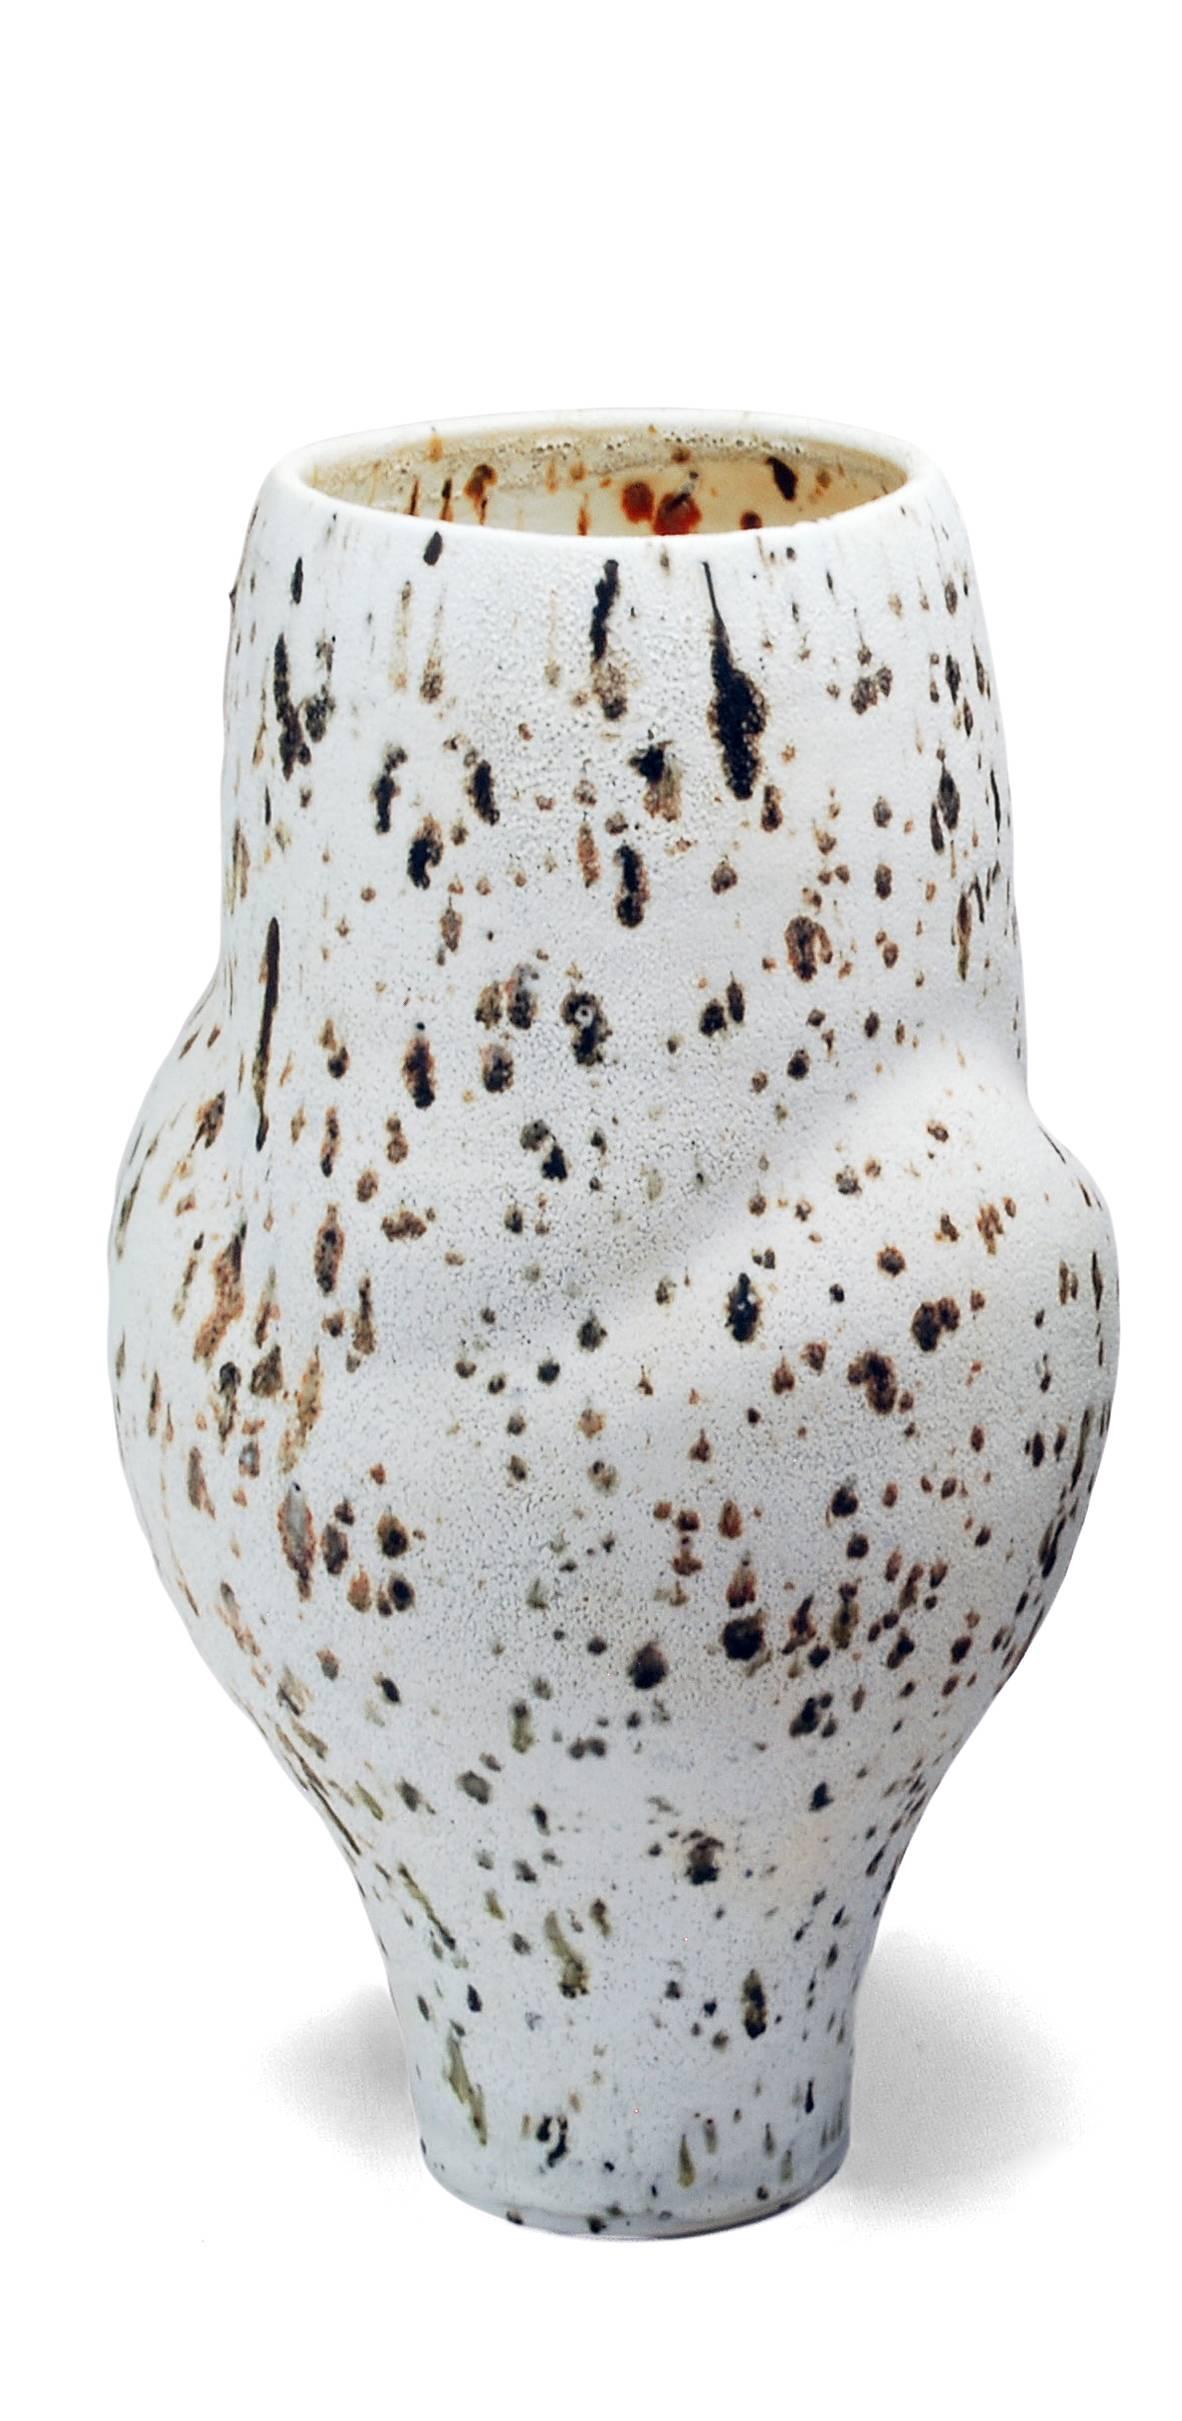 Wood Fired Porcelain Jar with Shino Glaze and Iron Particles  - Sculpture by Perry Haas